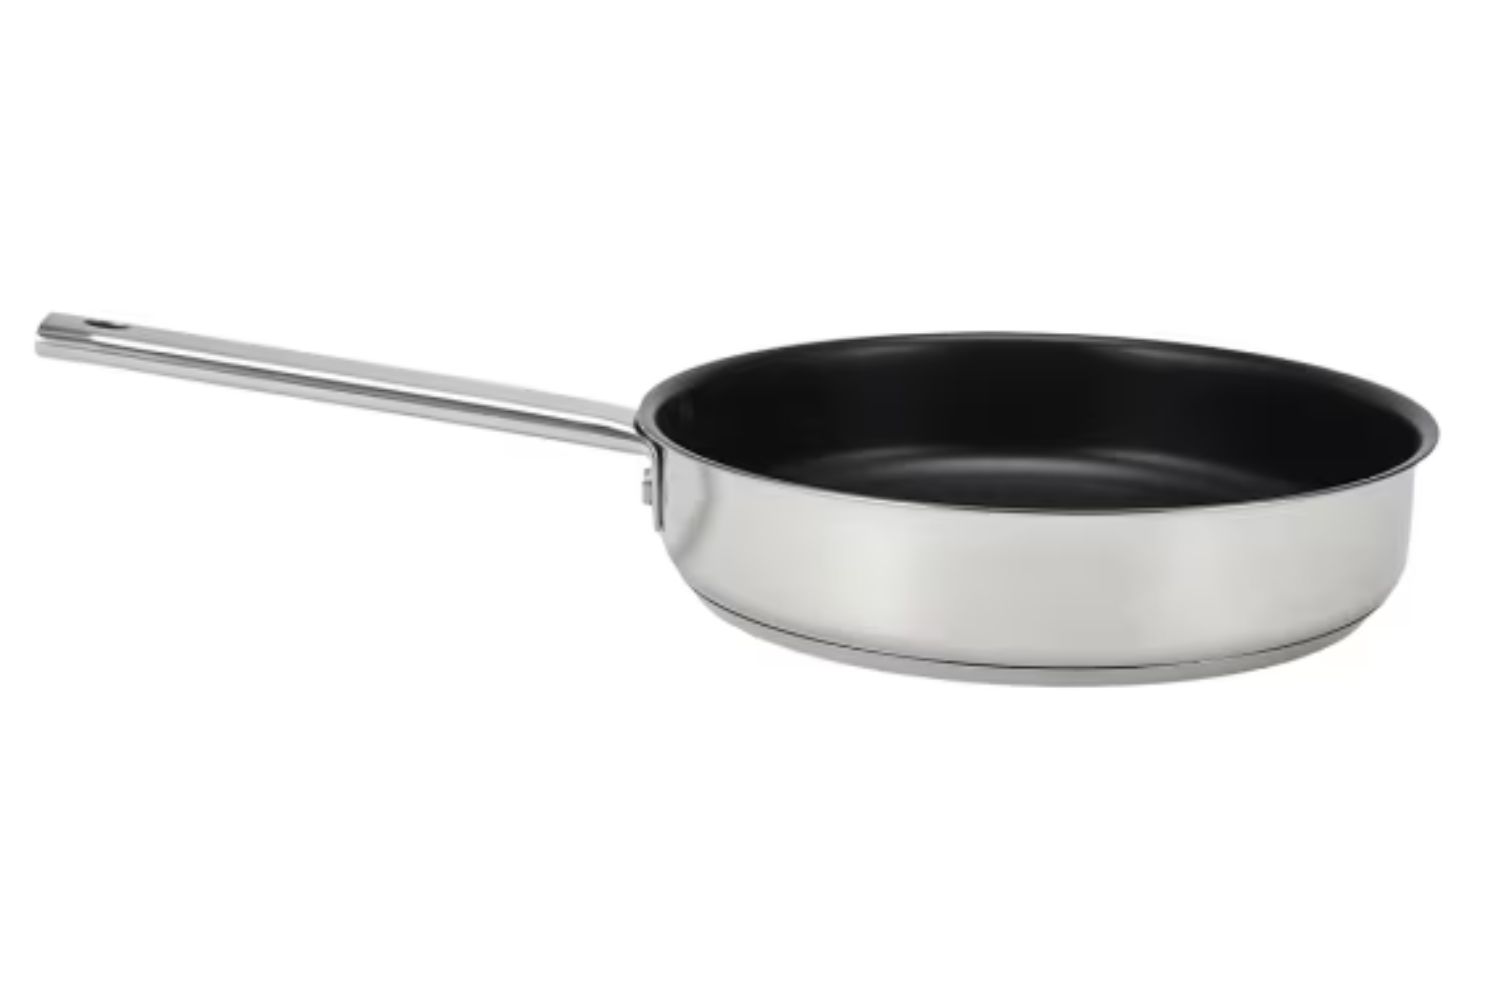 choice has named this kmart pan as the best, and it's only $19